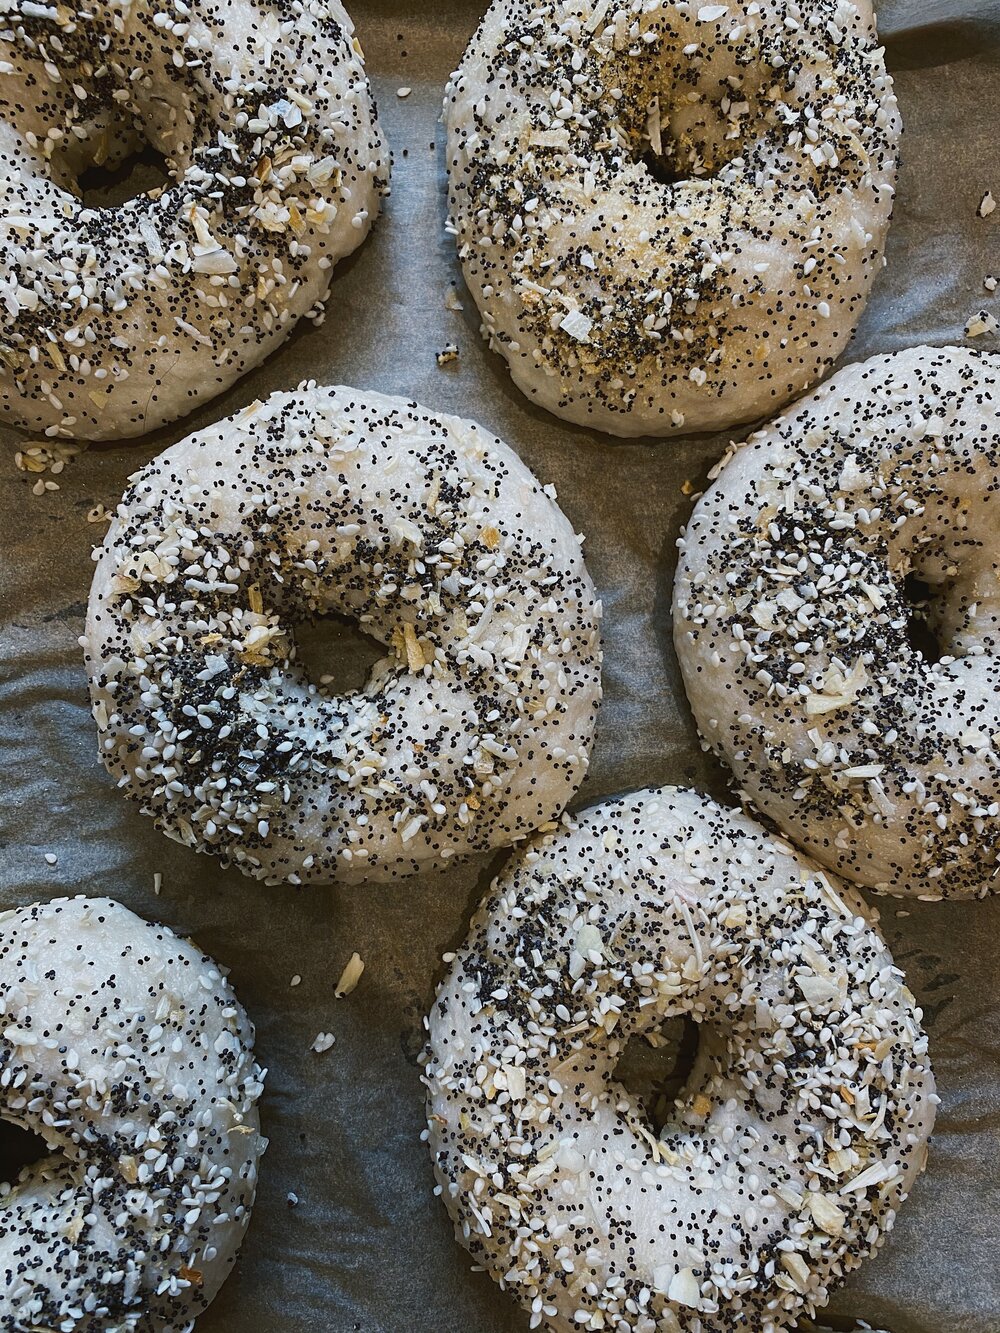 Homemade Everything Bagels